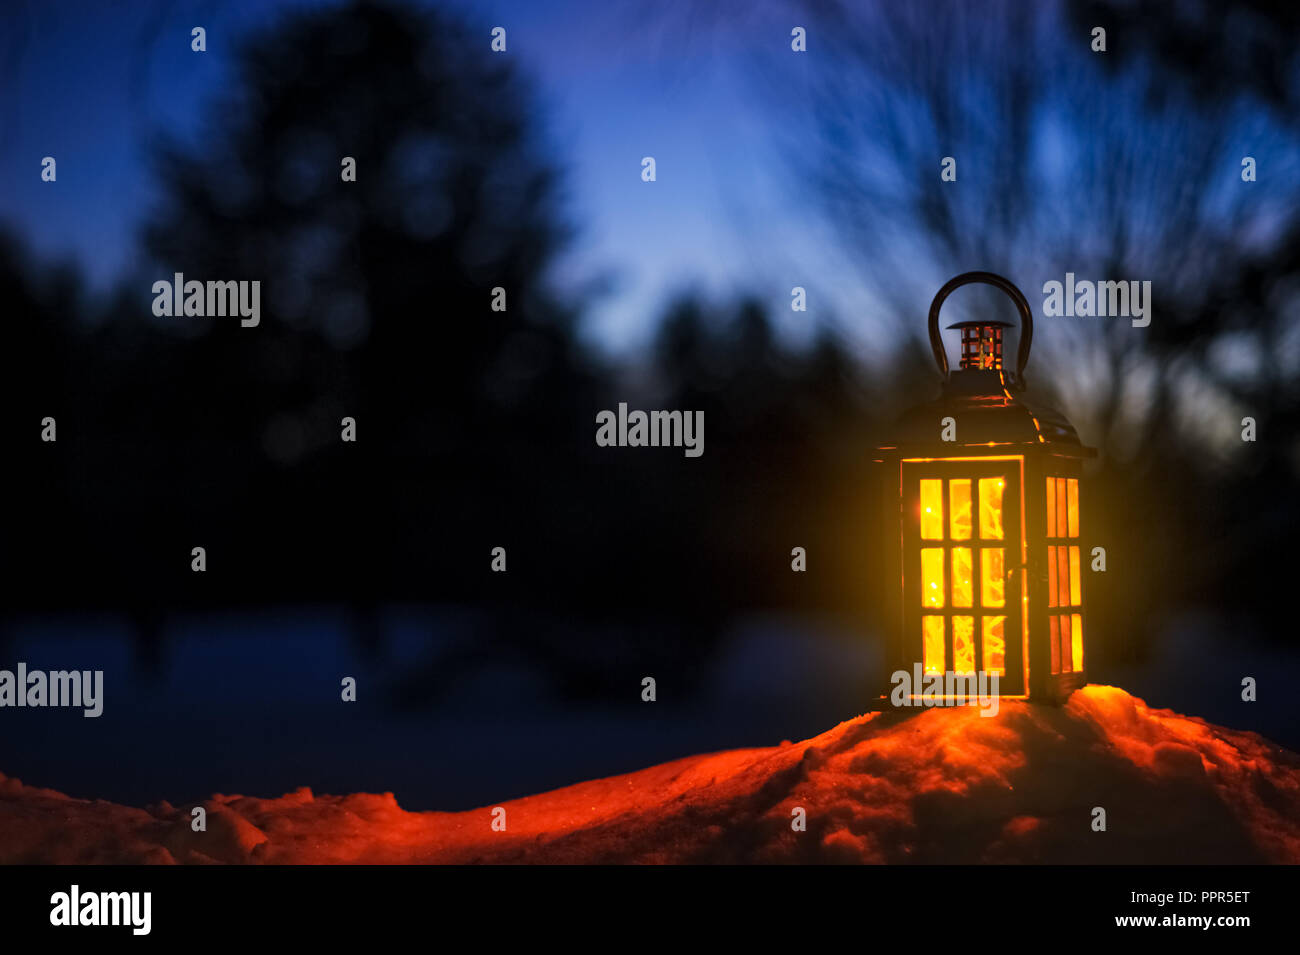 Lantern with Christmas lights in snow. Stock Photo